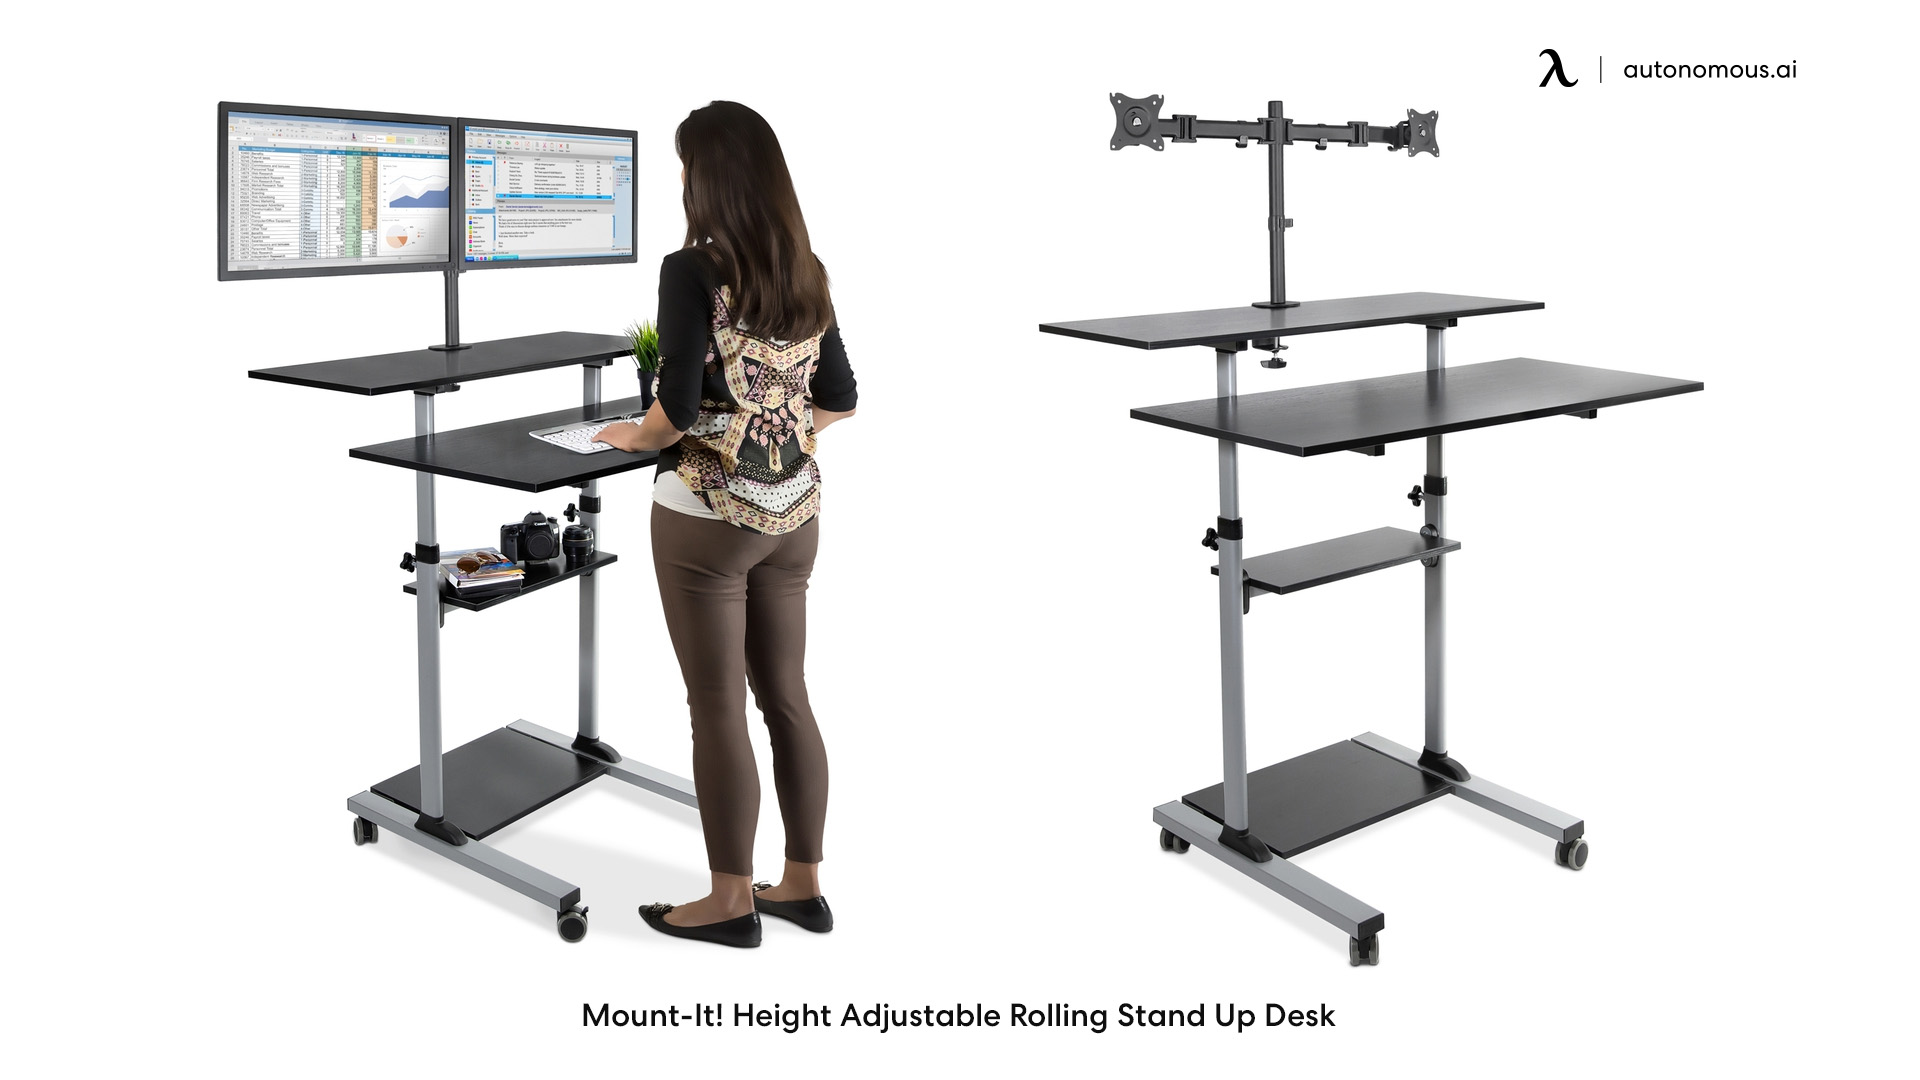 Height Adjustable Rolling Desk by Mount-It!